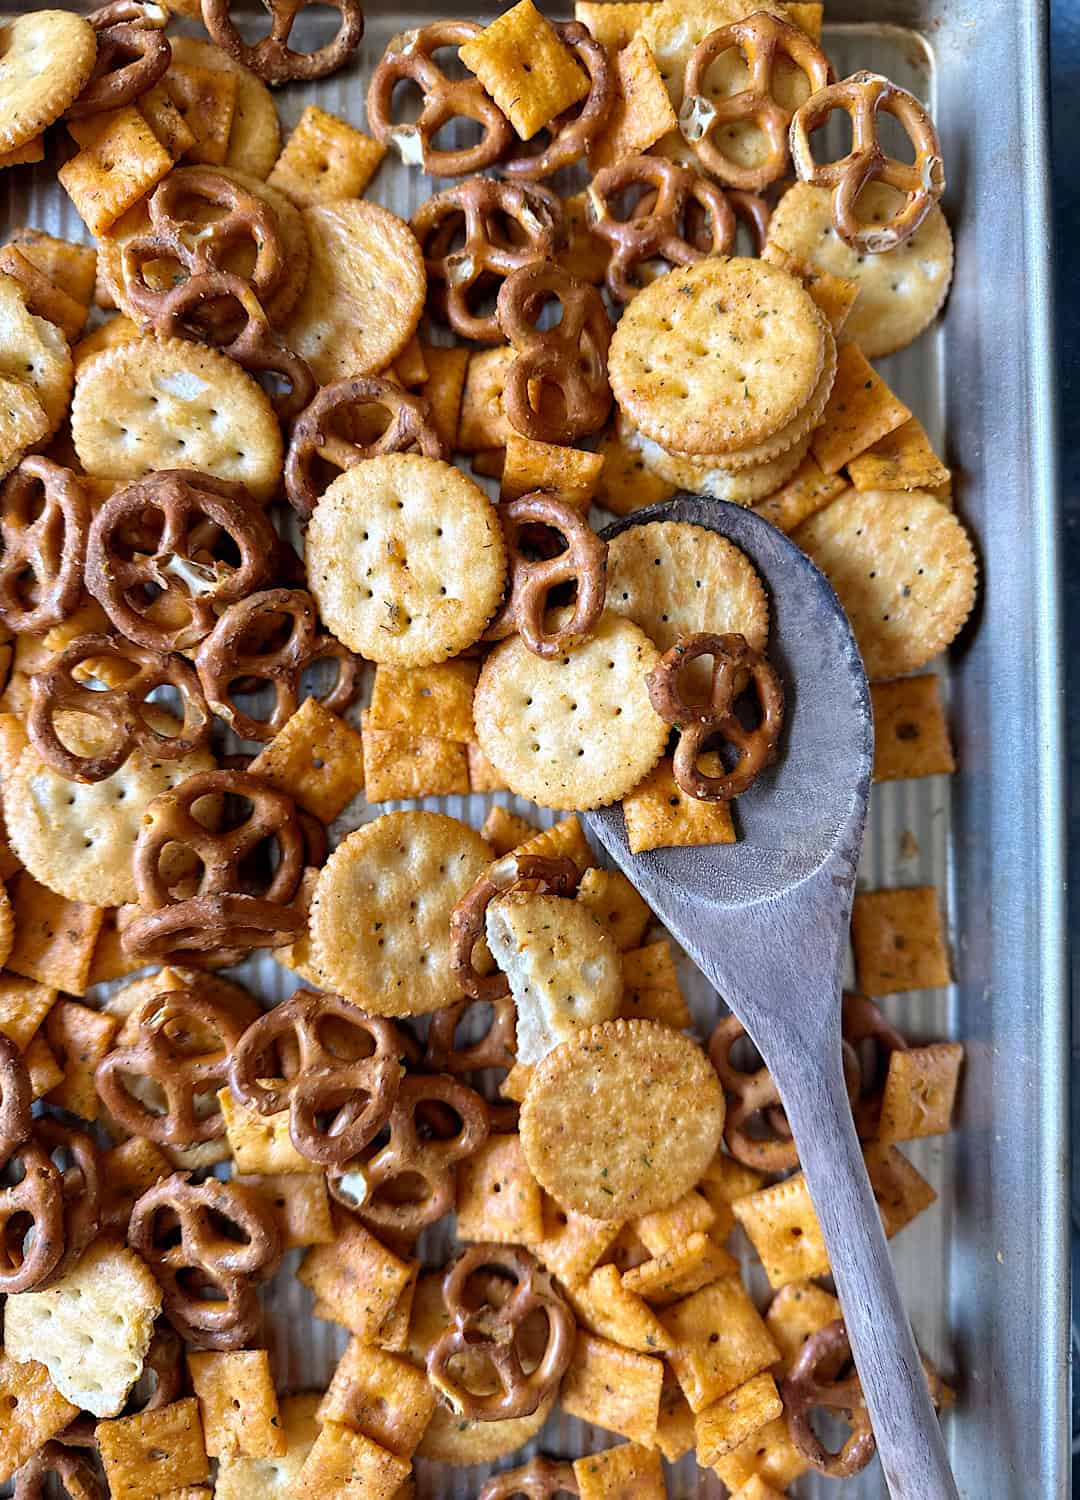 baked buffalo ranch snack mix with wooden spoon